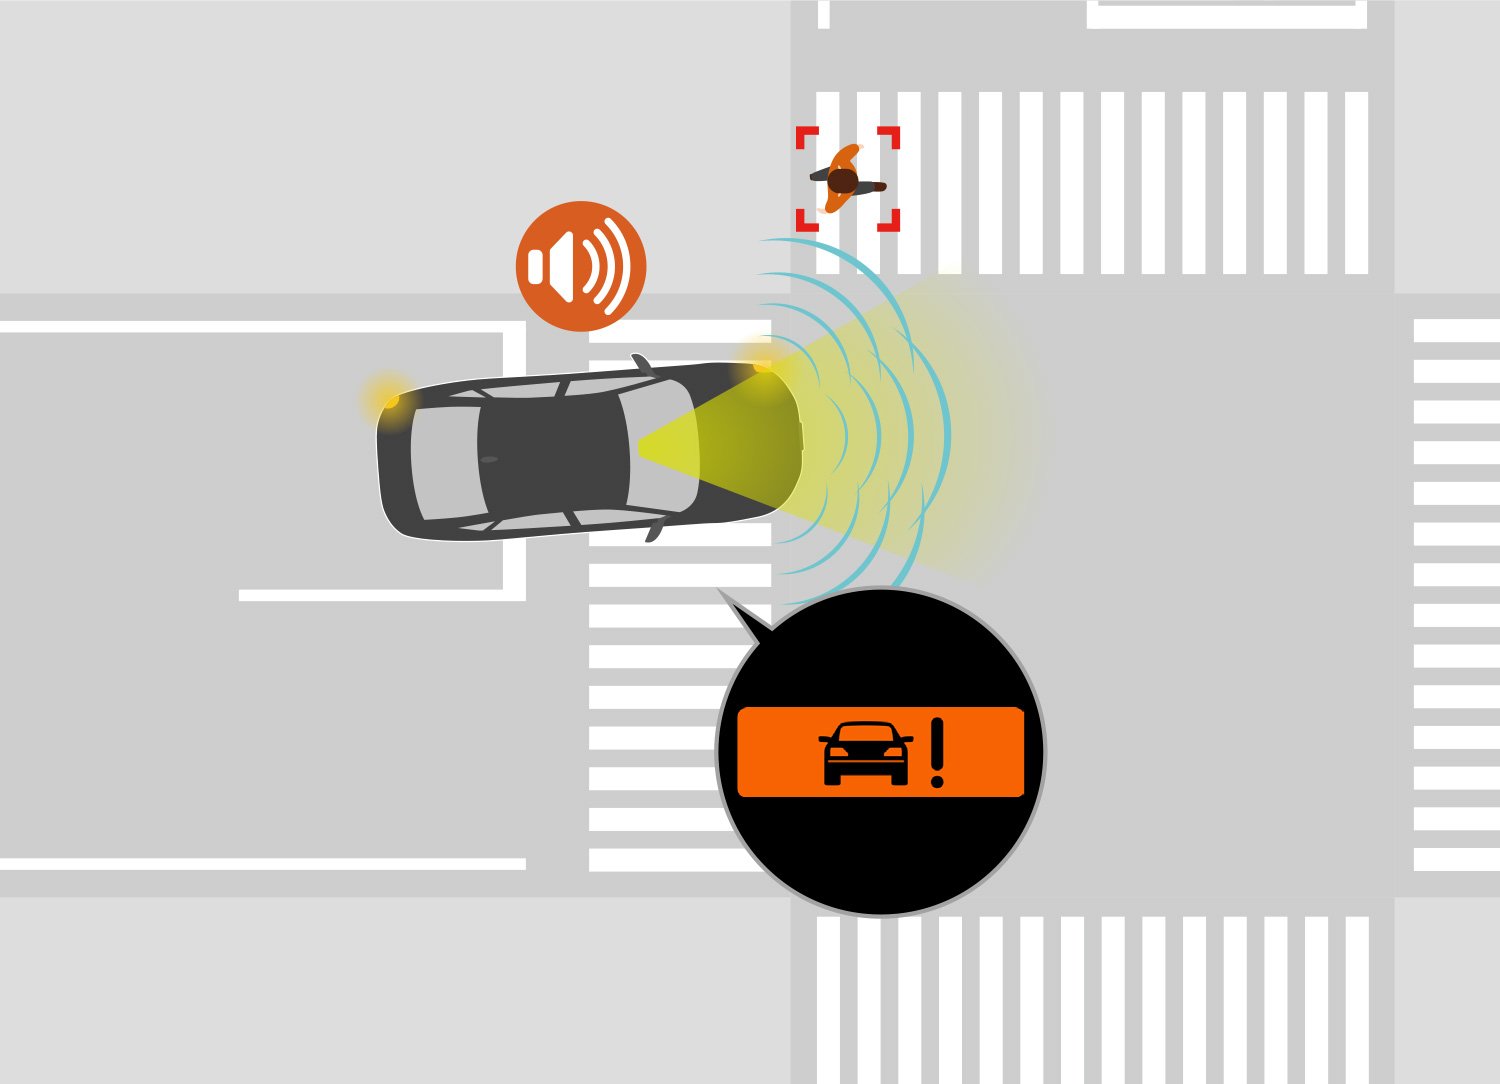 When there is a risk of a collision, the system alerts the driver by providing audible warnings and displaying visual warnings.